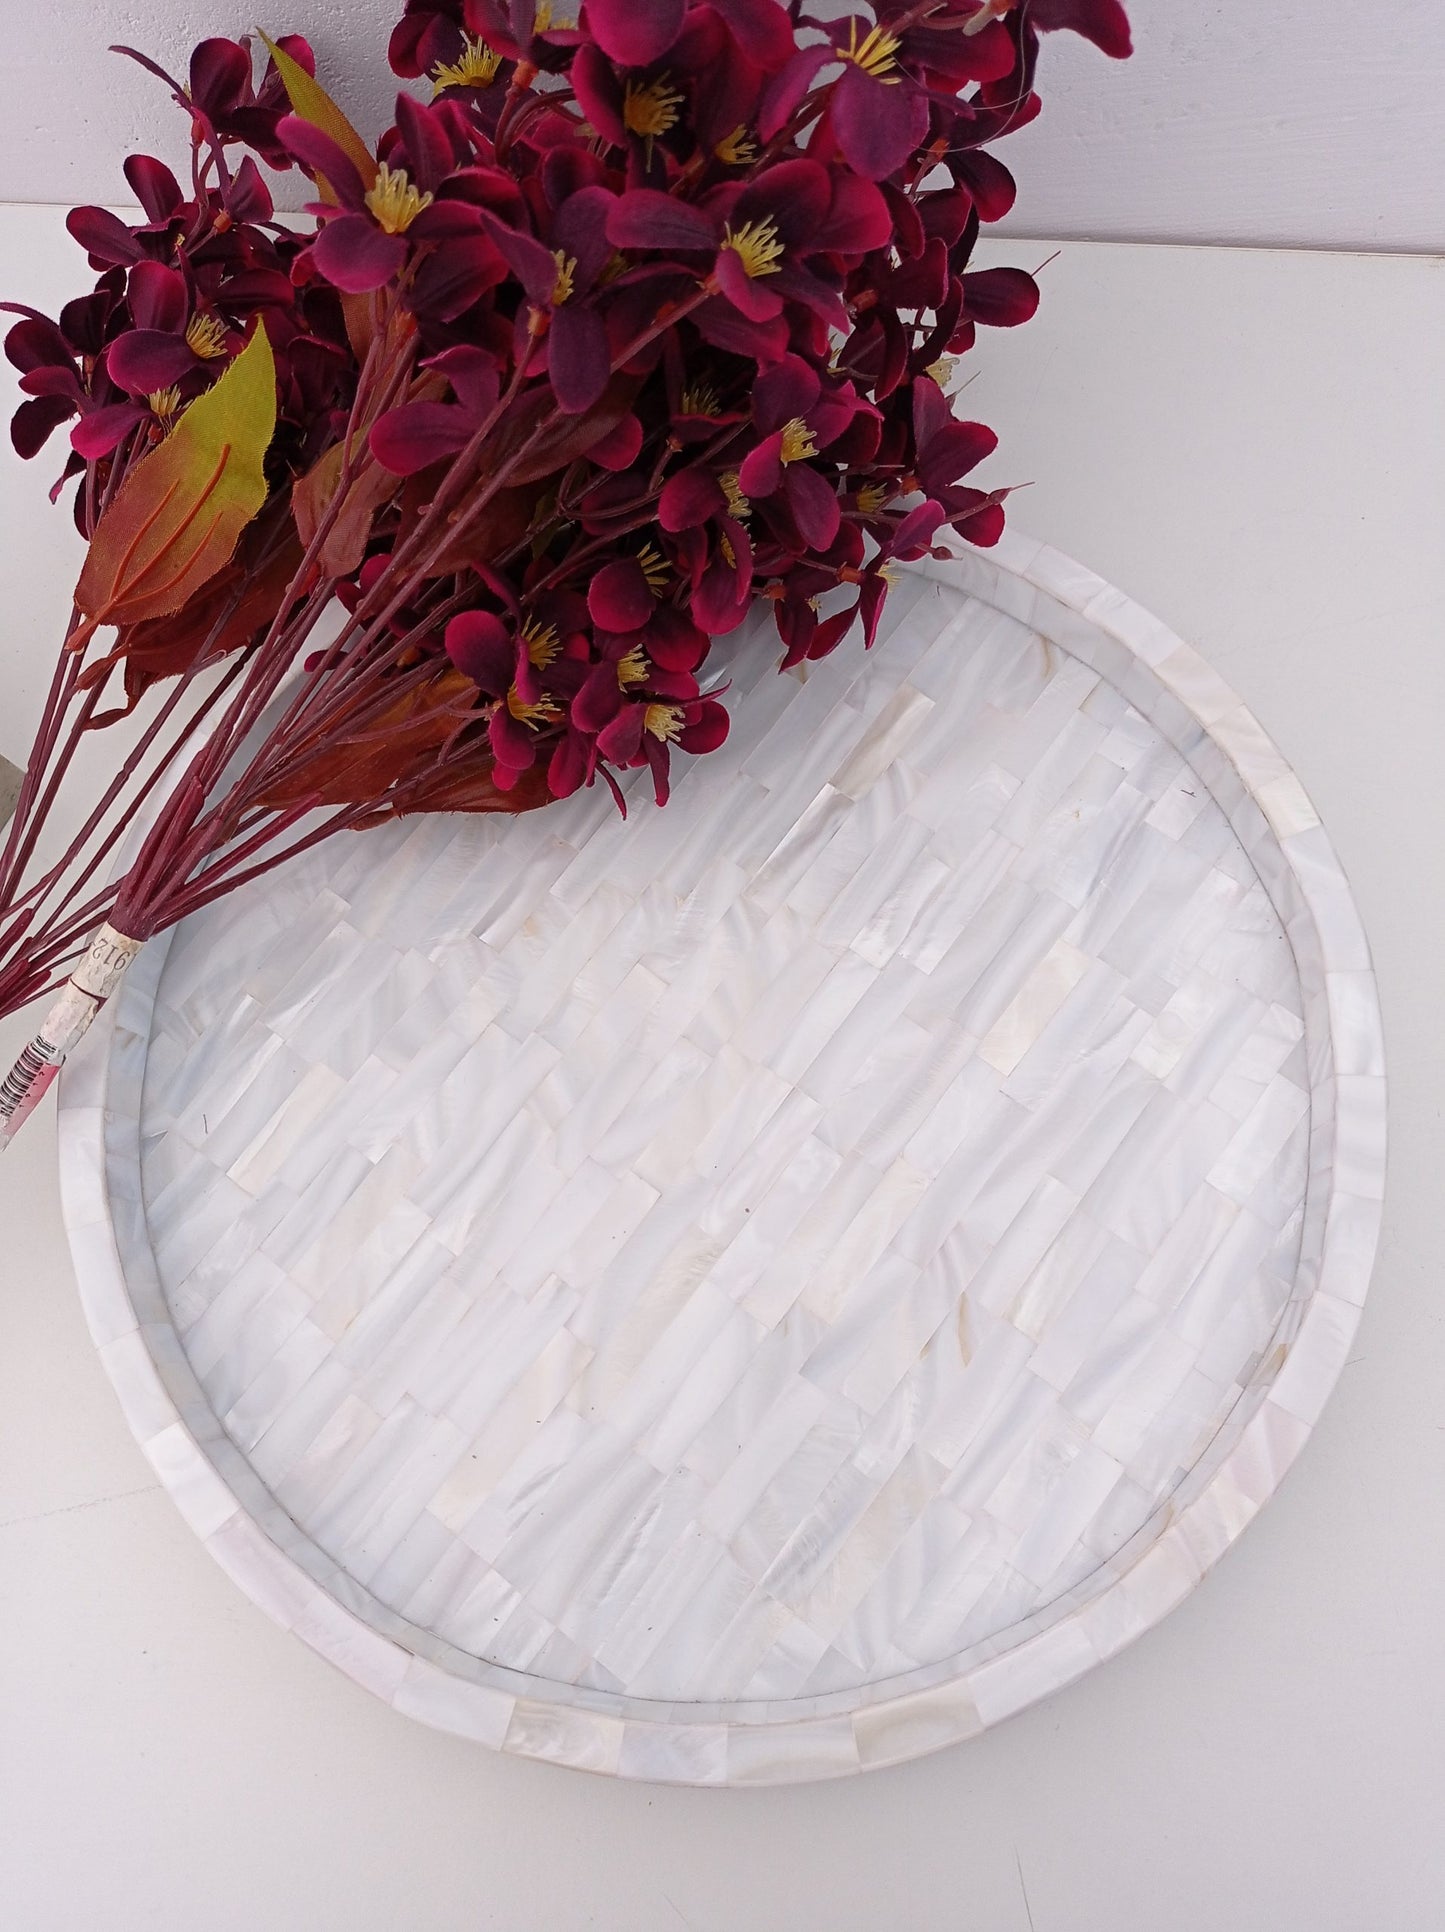 Handmade Customized Mother of Pearl Round Serving Tray